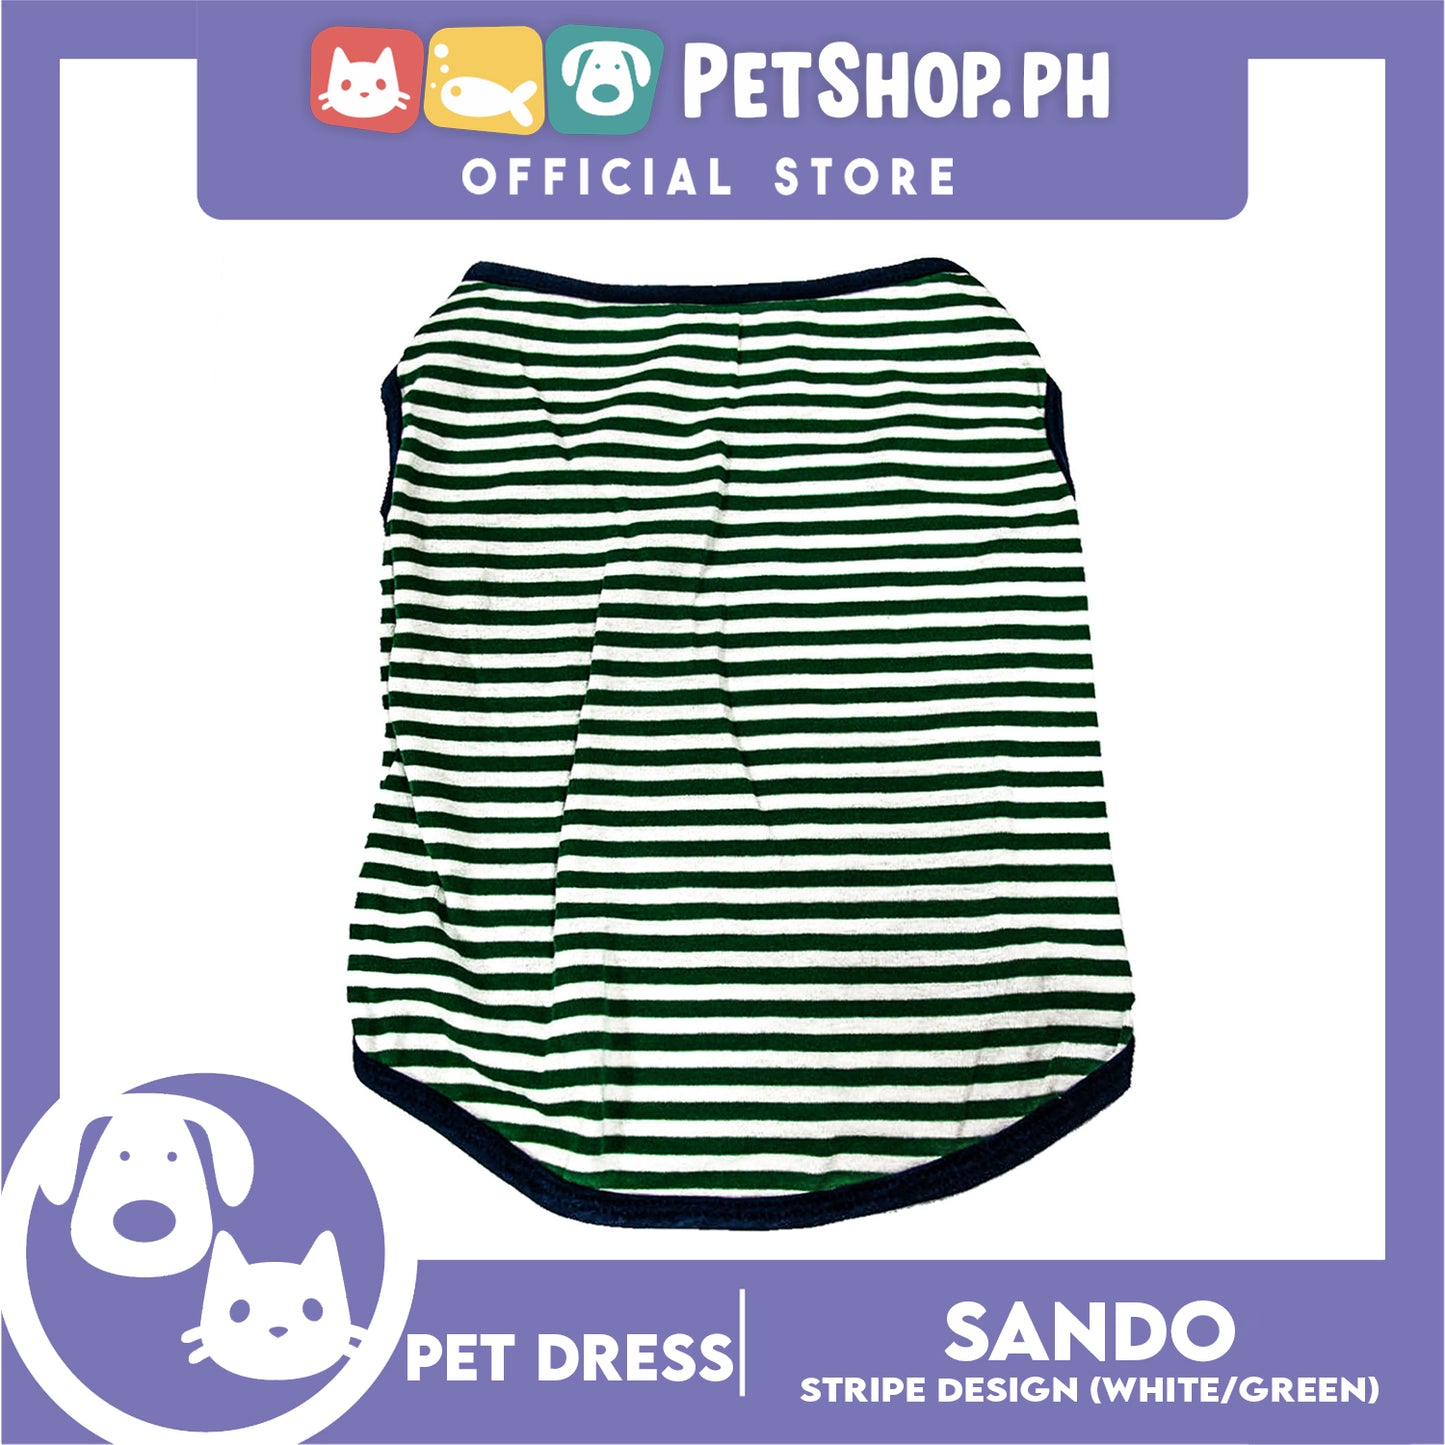 Pet Shirt Stripes (Medium) With Blue Piping Sleeveless for Puppy, Small Dog and Cats- Sando Breathable Clothes, Pet T-shirt, Sweatshirt